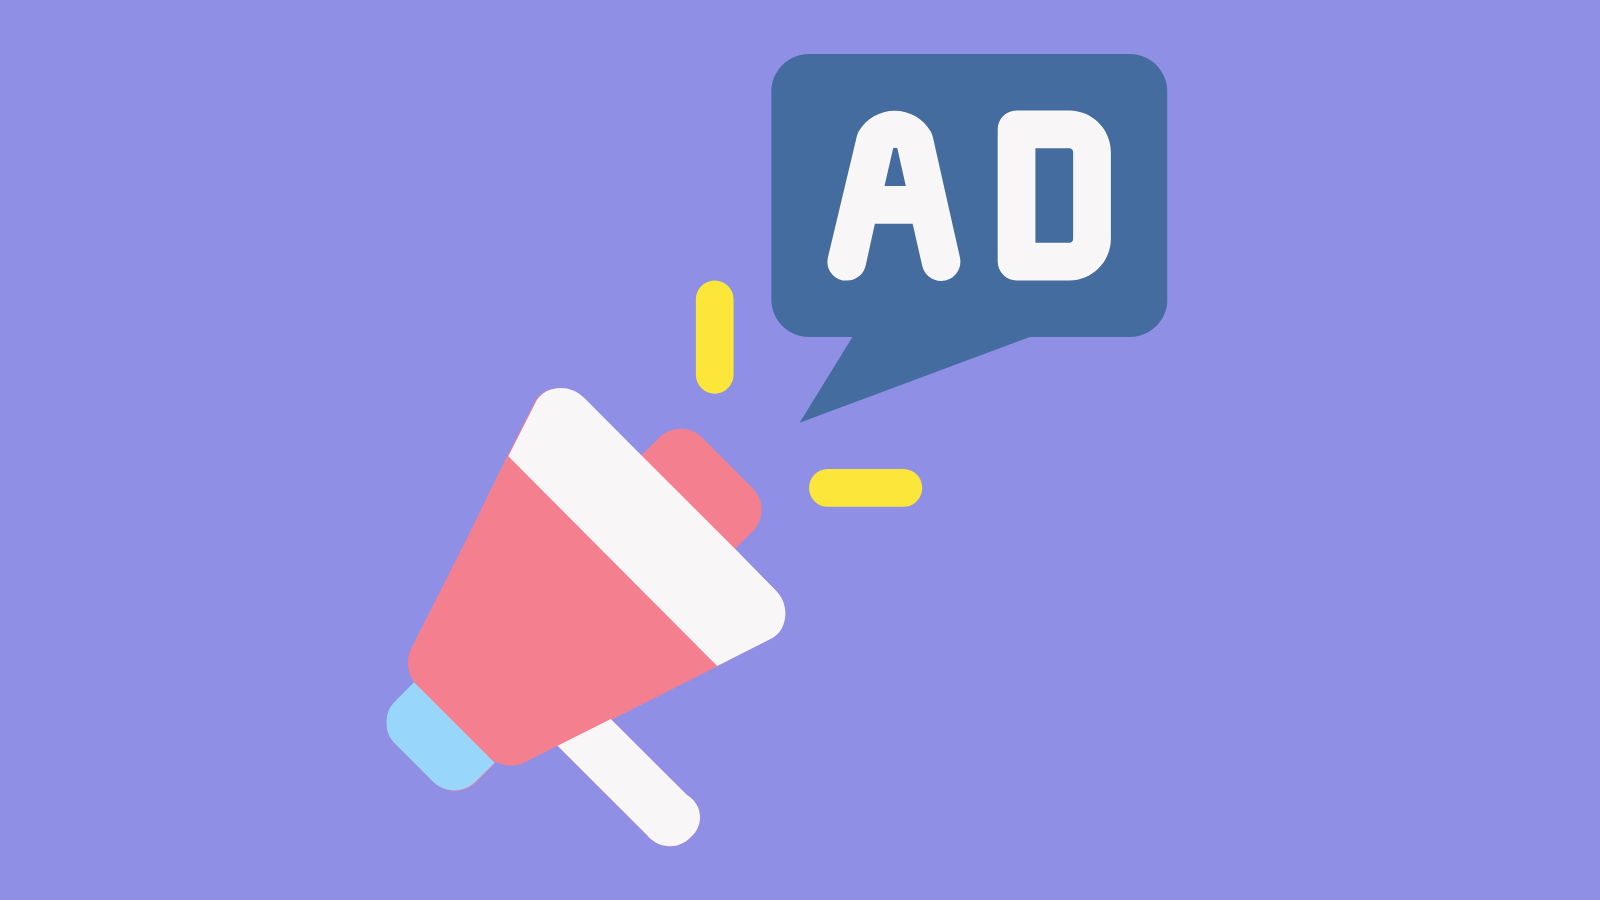 A megaphone with a speech bubble that says ad pointing to it (1)